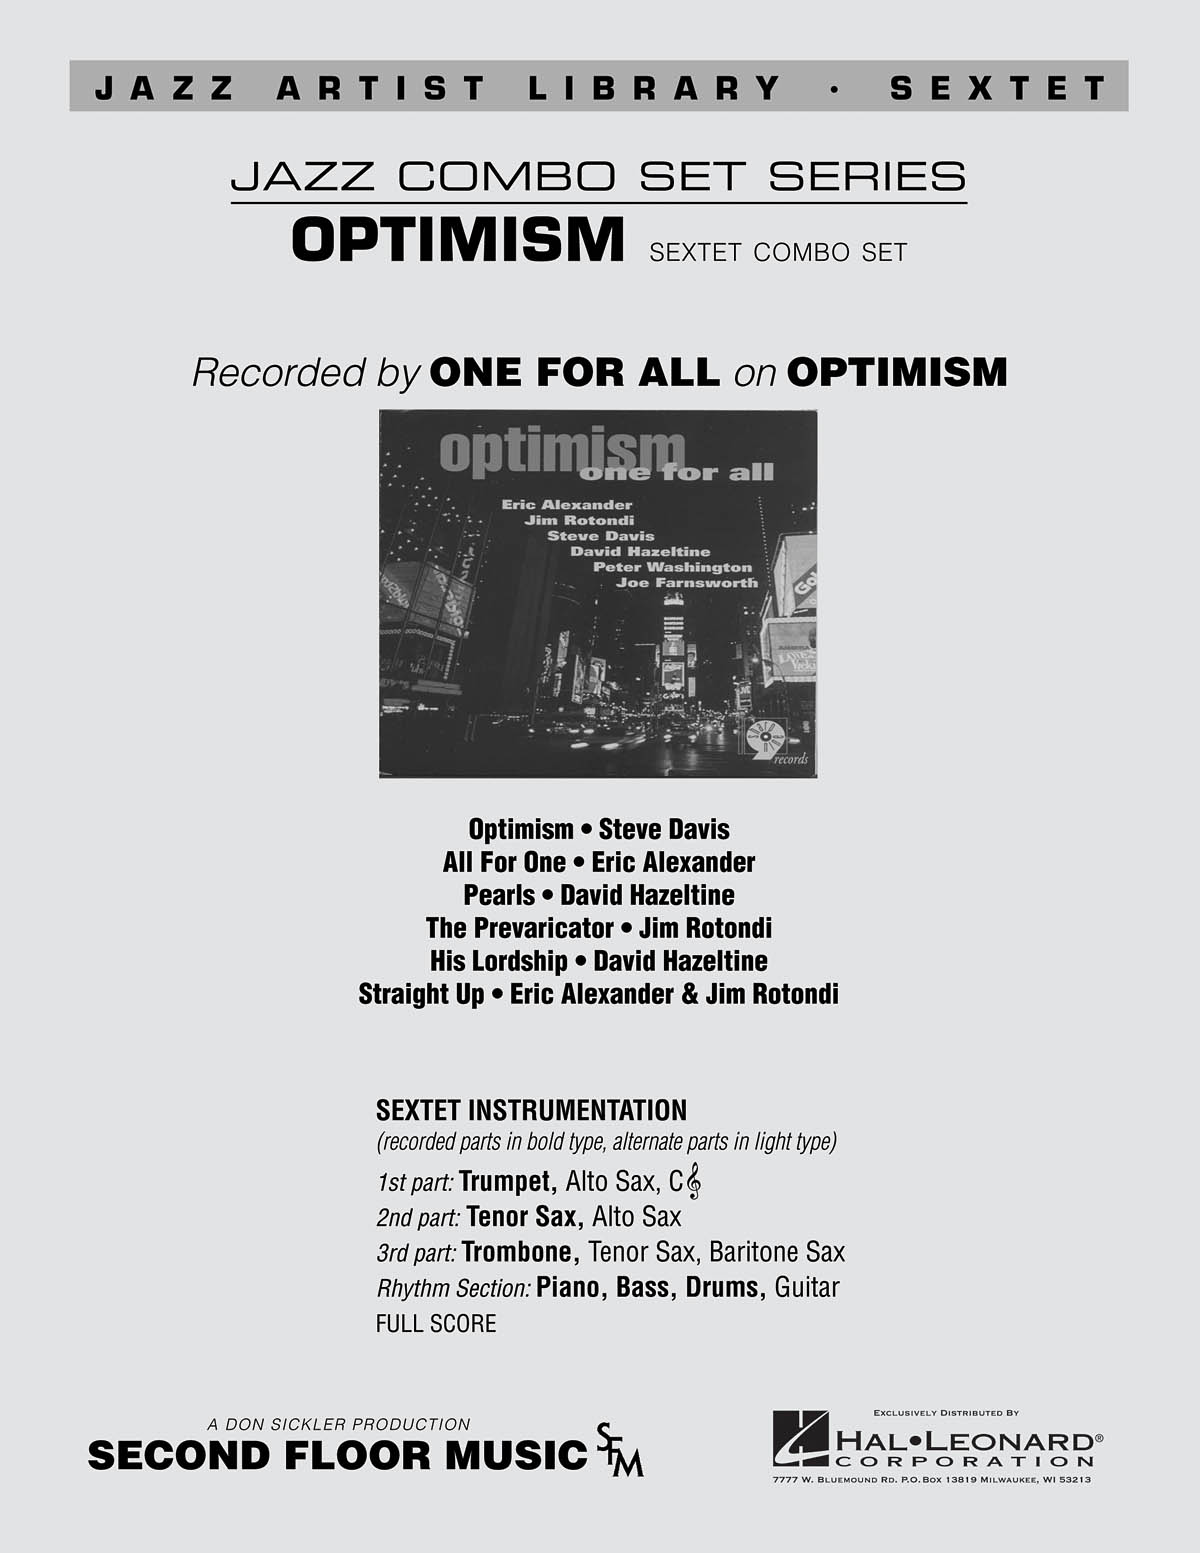 Optimism: 6 Charts Recorded by One For All(Jazz Combo Set Series)